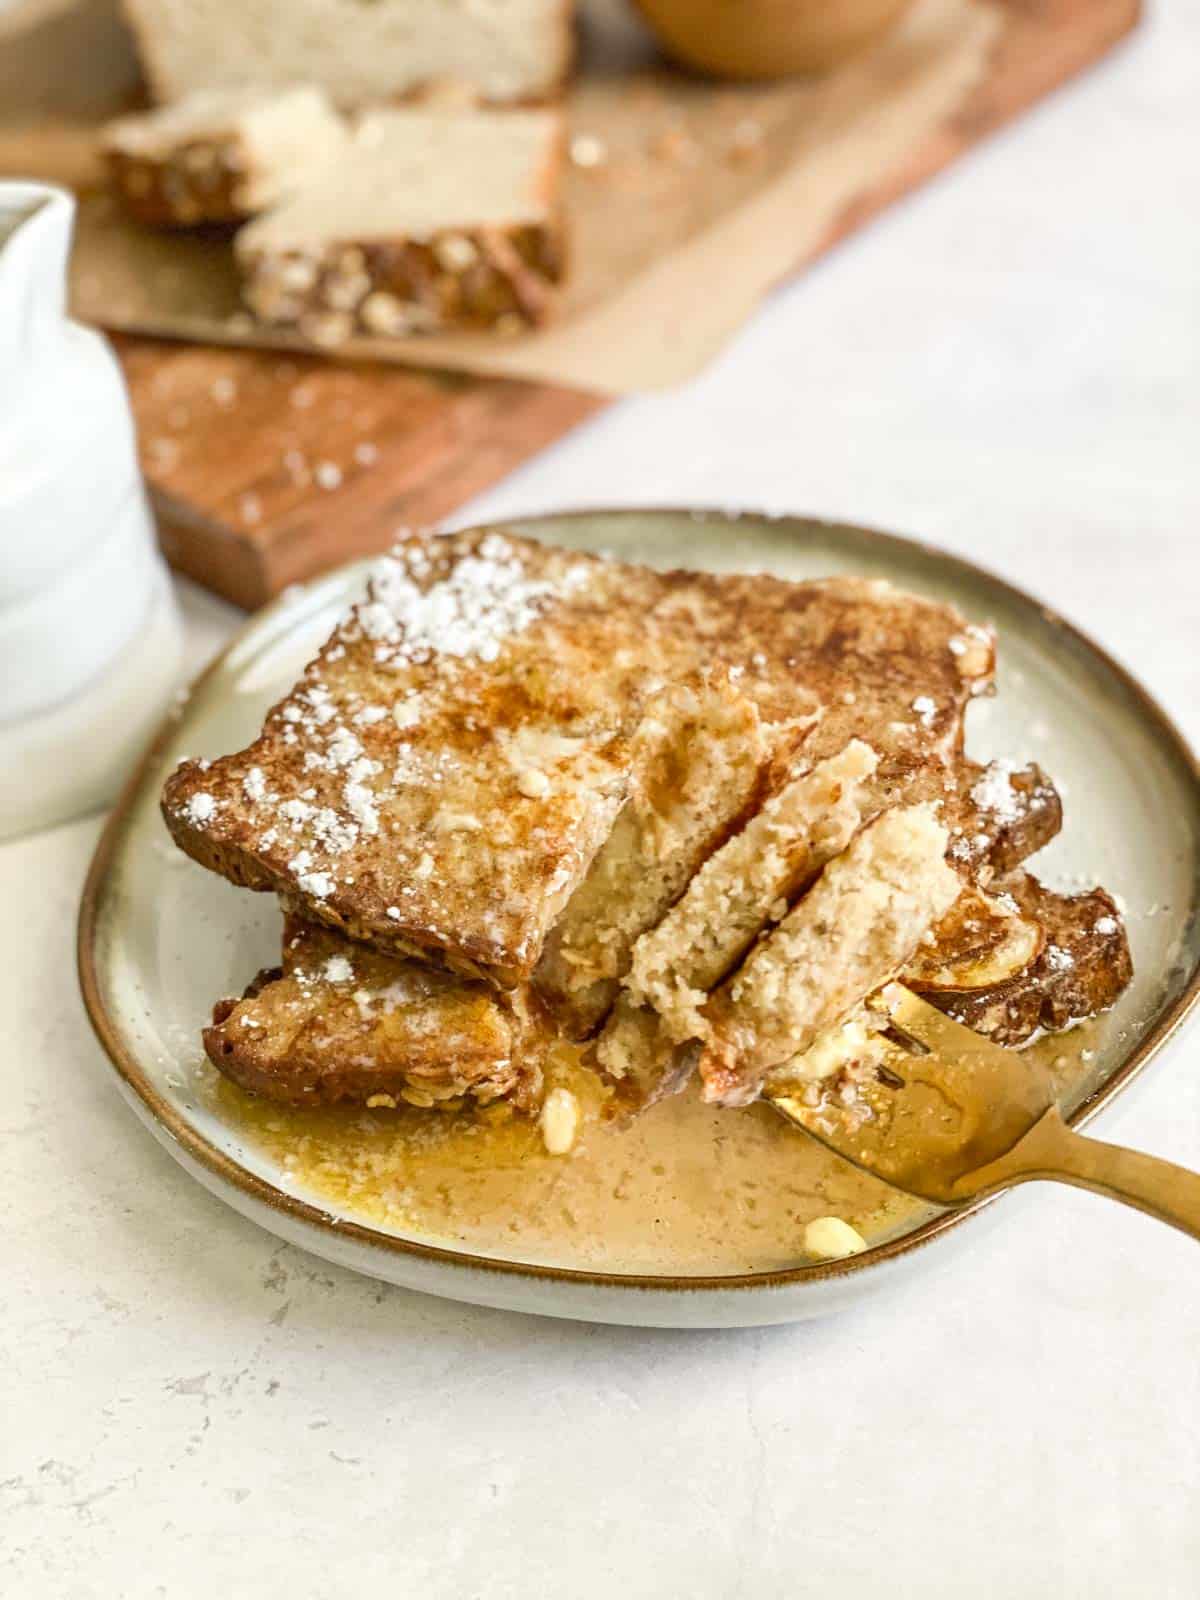 Sourdough French toast on a plate with fork